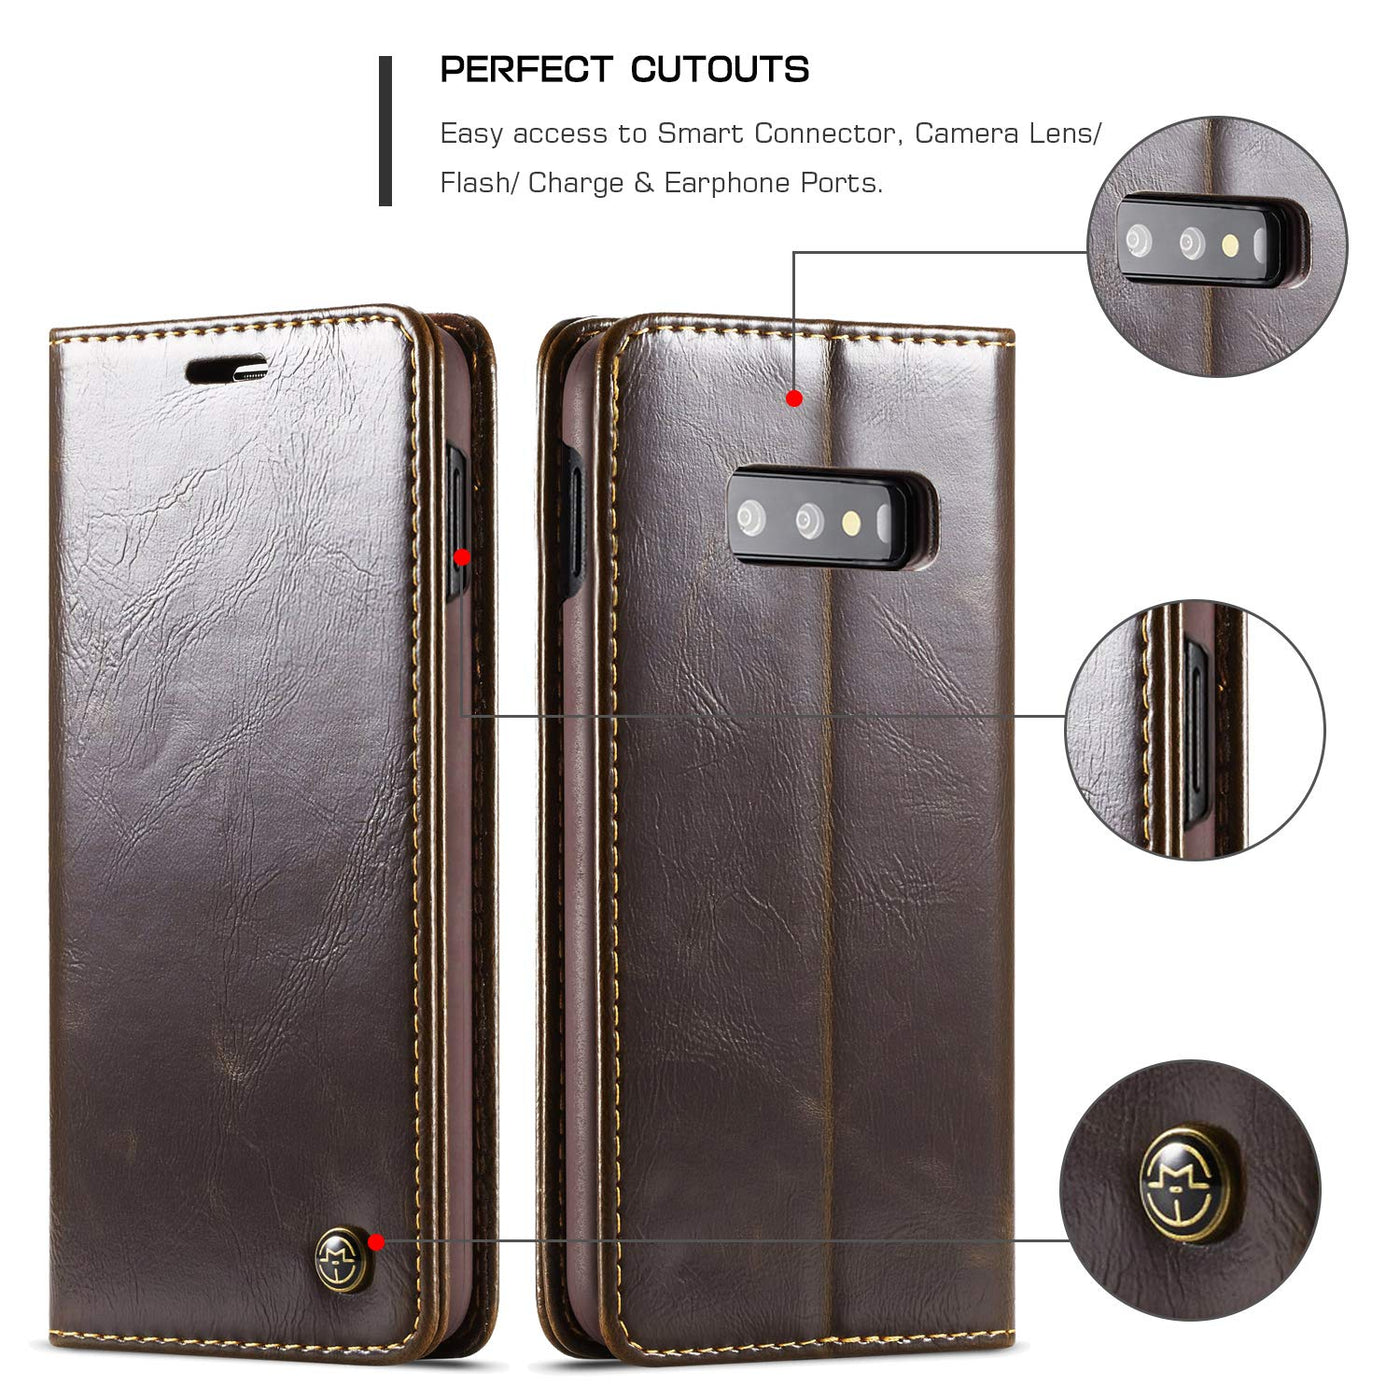 Samsung Galaxy S10 full body protection Leather Wallet flip case cover by Excelsior